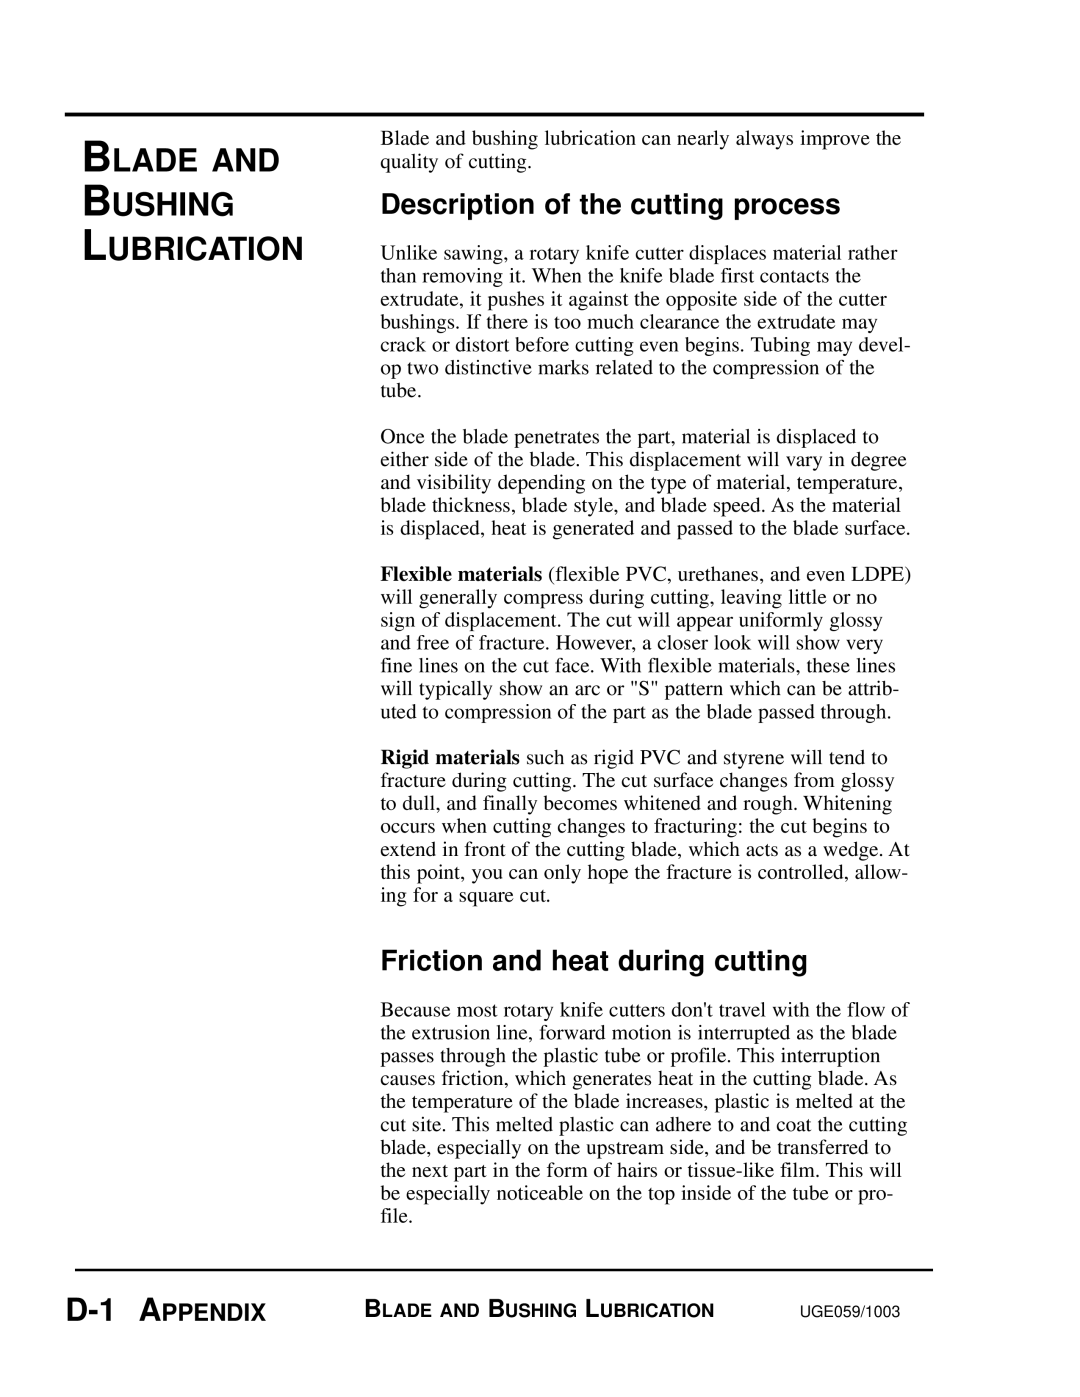 Conair SC-5 manual Blade And Bushing Lubrication, Description of the cutting process, Friction and heat during cutting 